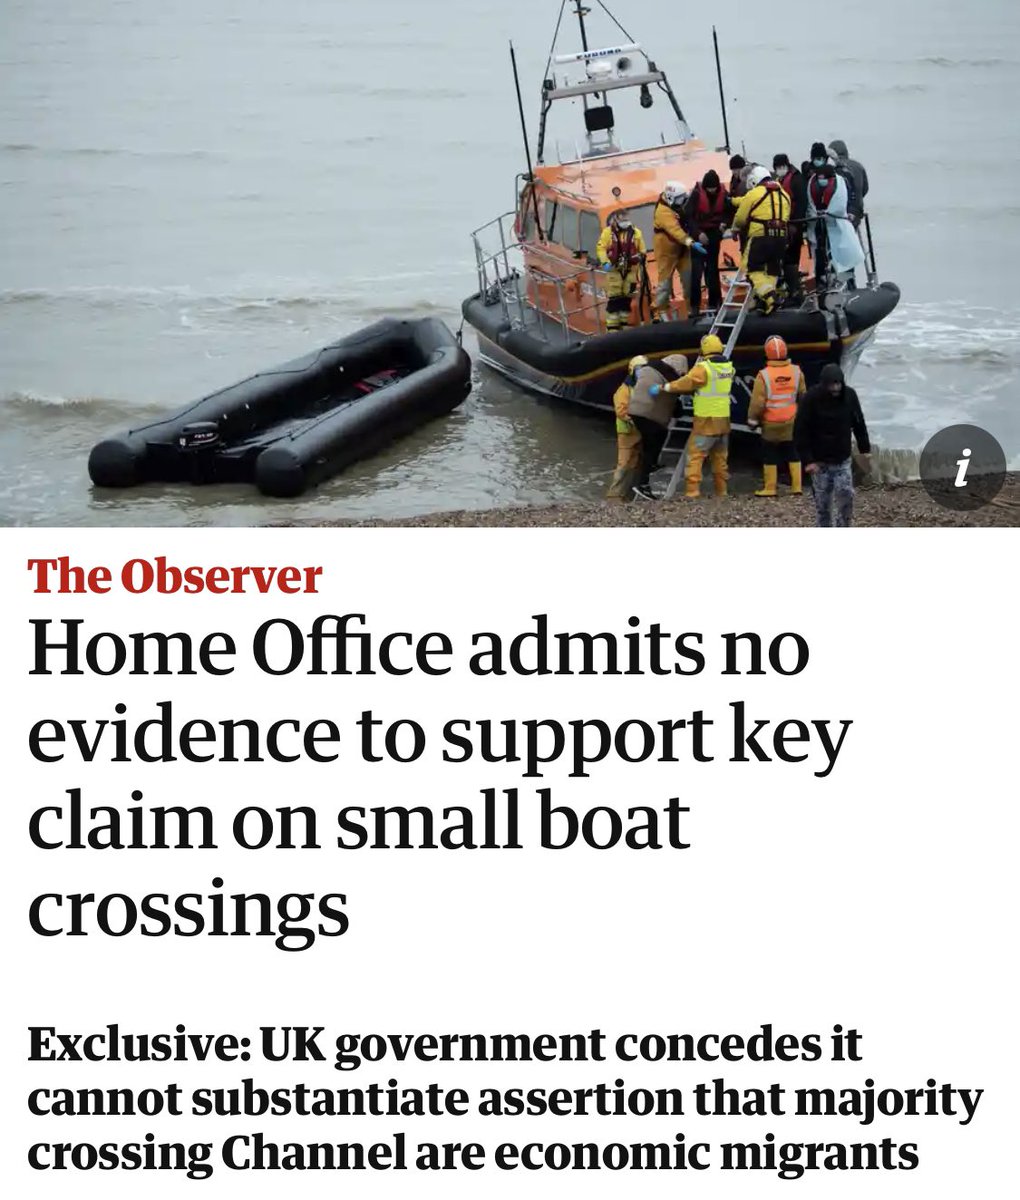 So. There’s NO evidence that most people arriving by small boats are economic migrants. But there’s LOTS of evidence that Patel and Braverman told that lie. A lie that has stoked racism and justified evil legislating. And we just carry on with that do we? As if it’s no big deal?